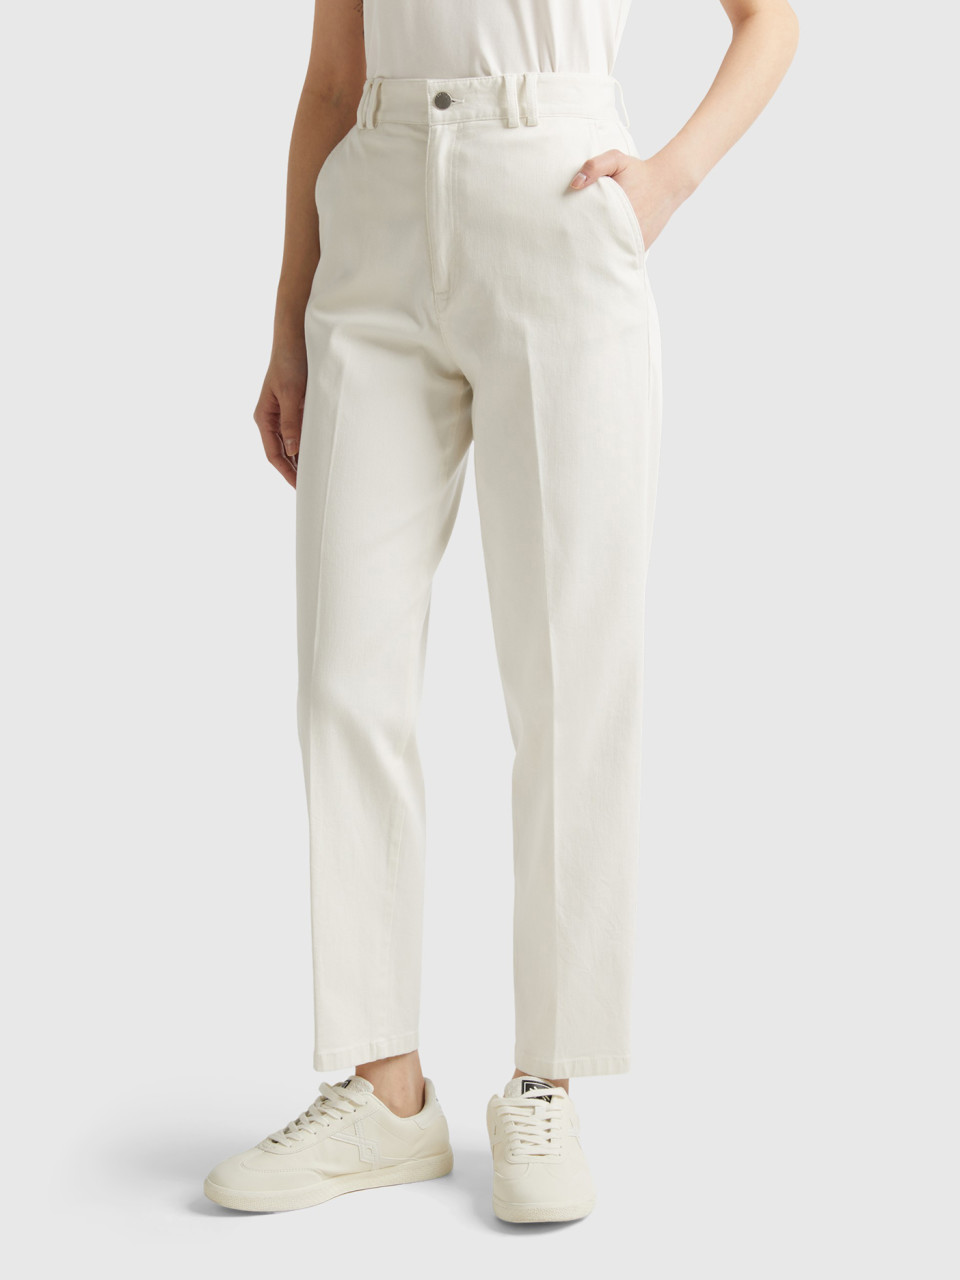 Benetton, Chino Trousers In Cotton And Modal®, Creamy White, Women